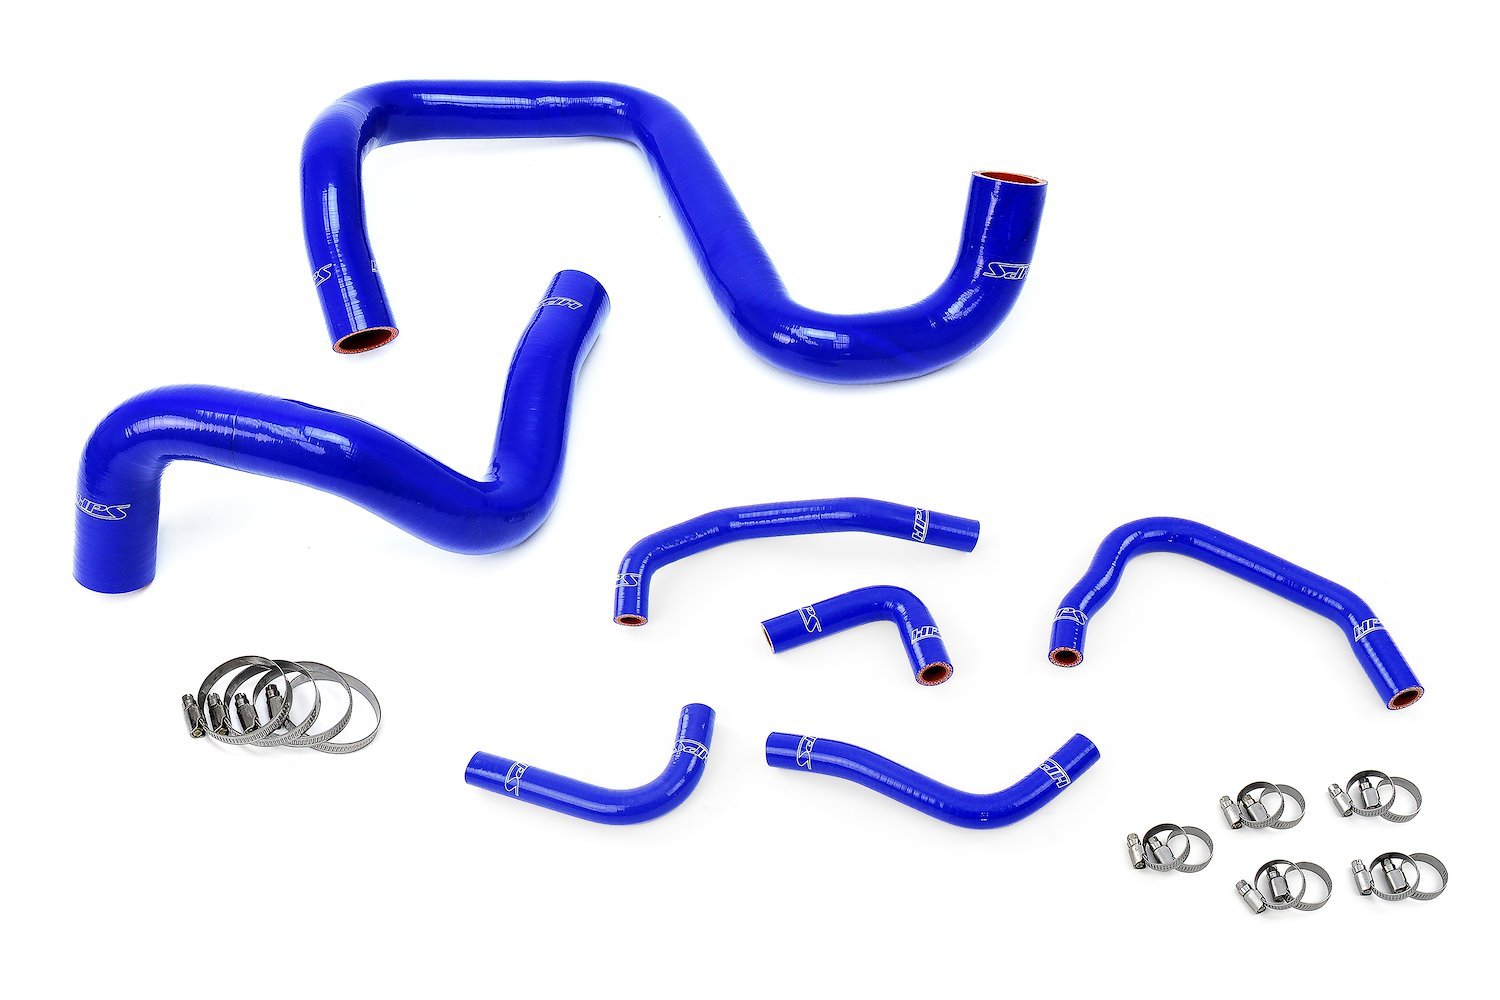 57-1285-BLUE Coolant Hose Kit, High-Temp 3-Ply Reinforced Silicone, Replace Rubber Radiator Heater Coolant Hoses